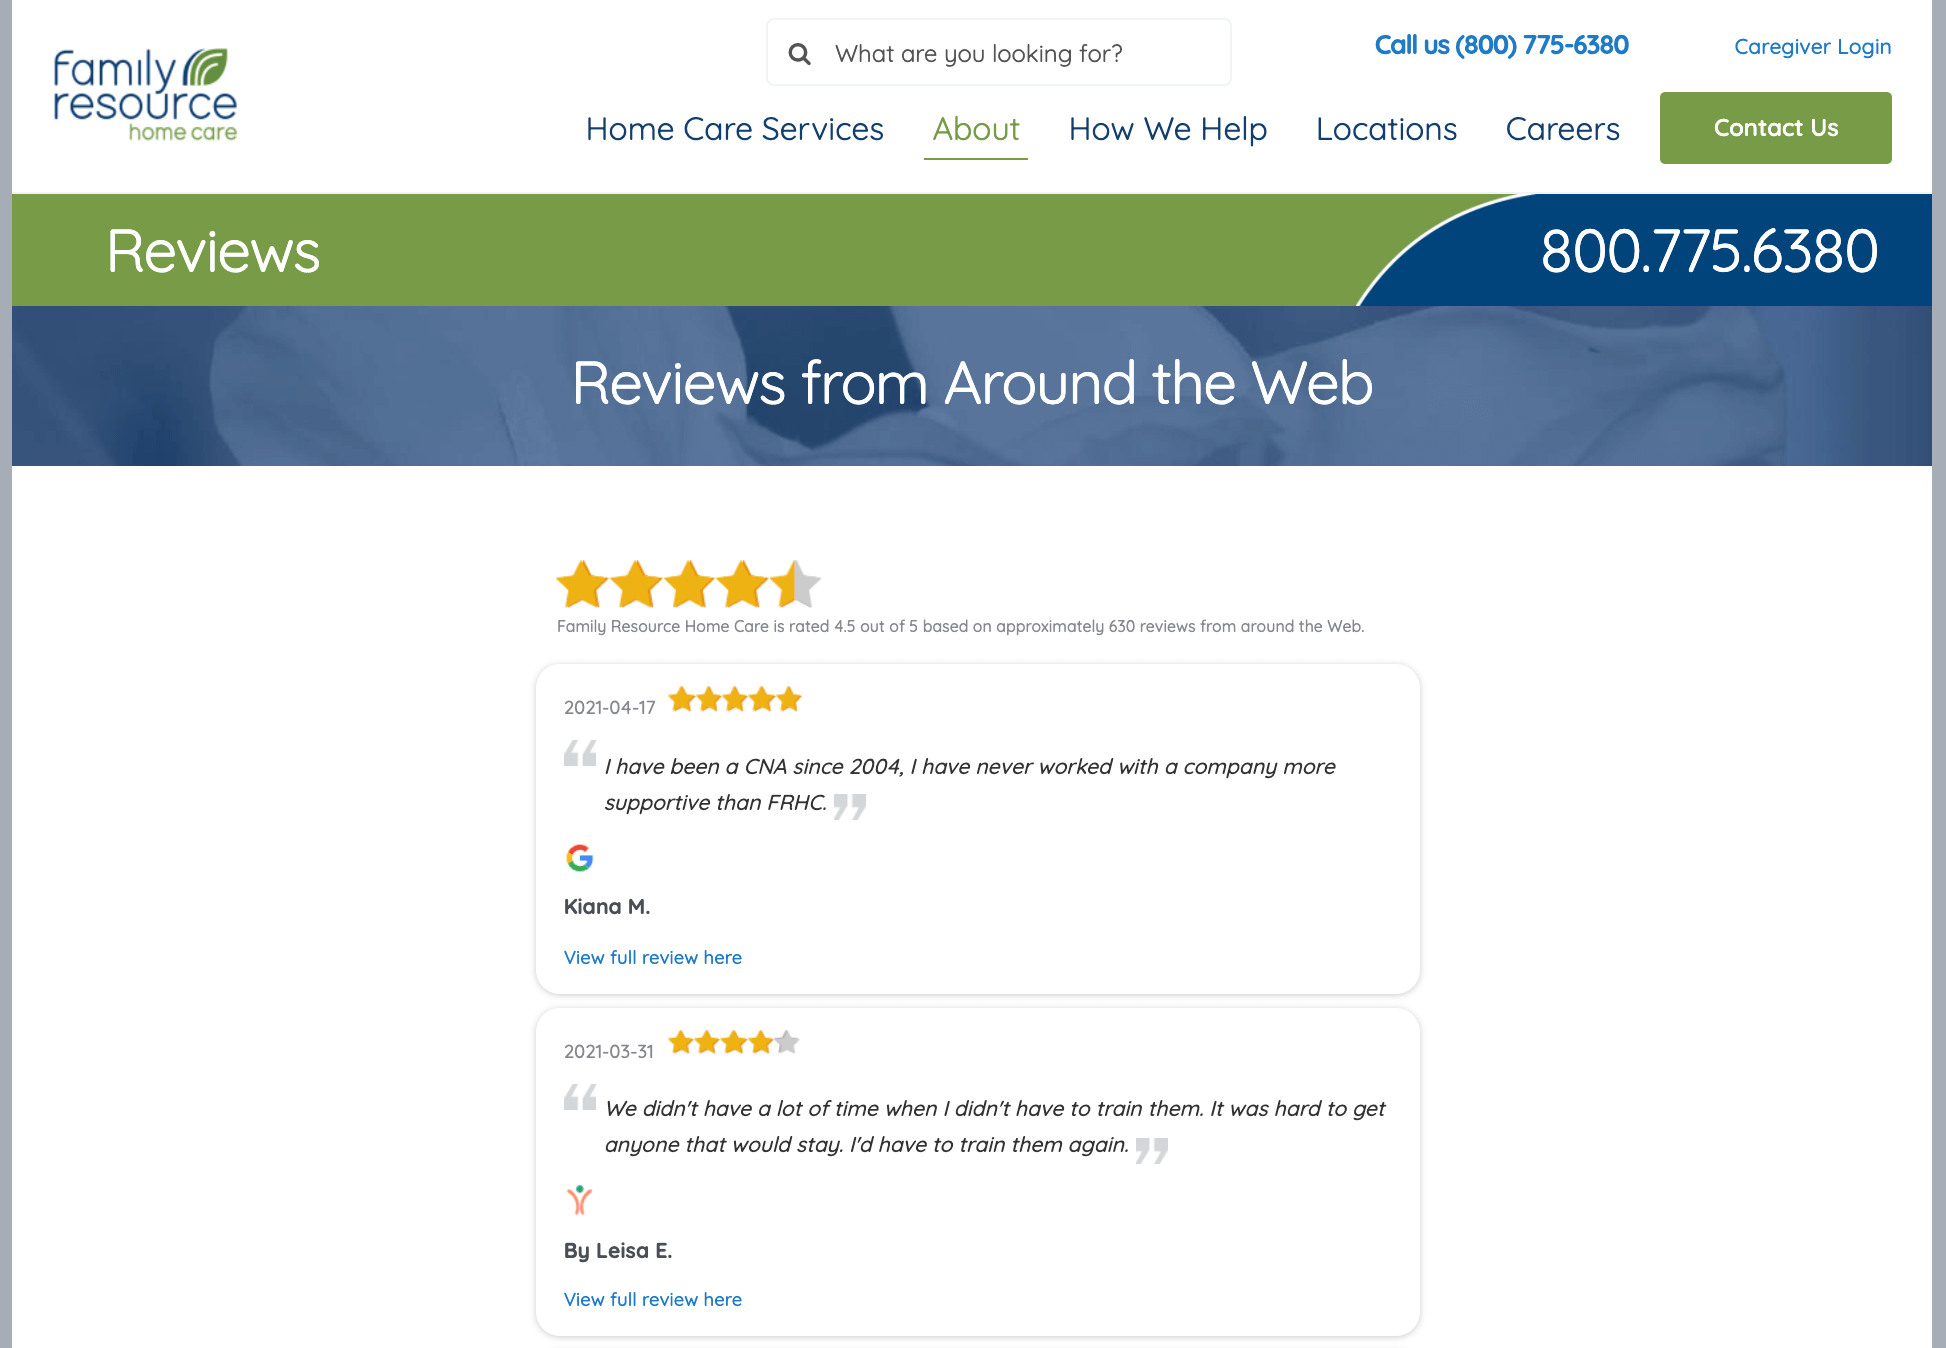 frhc reviews page